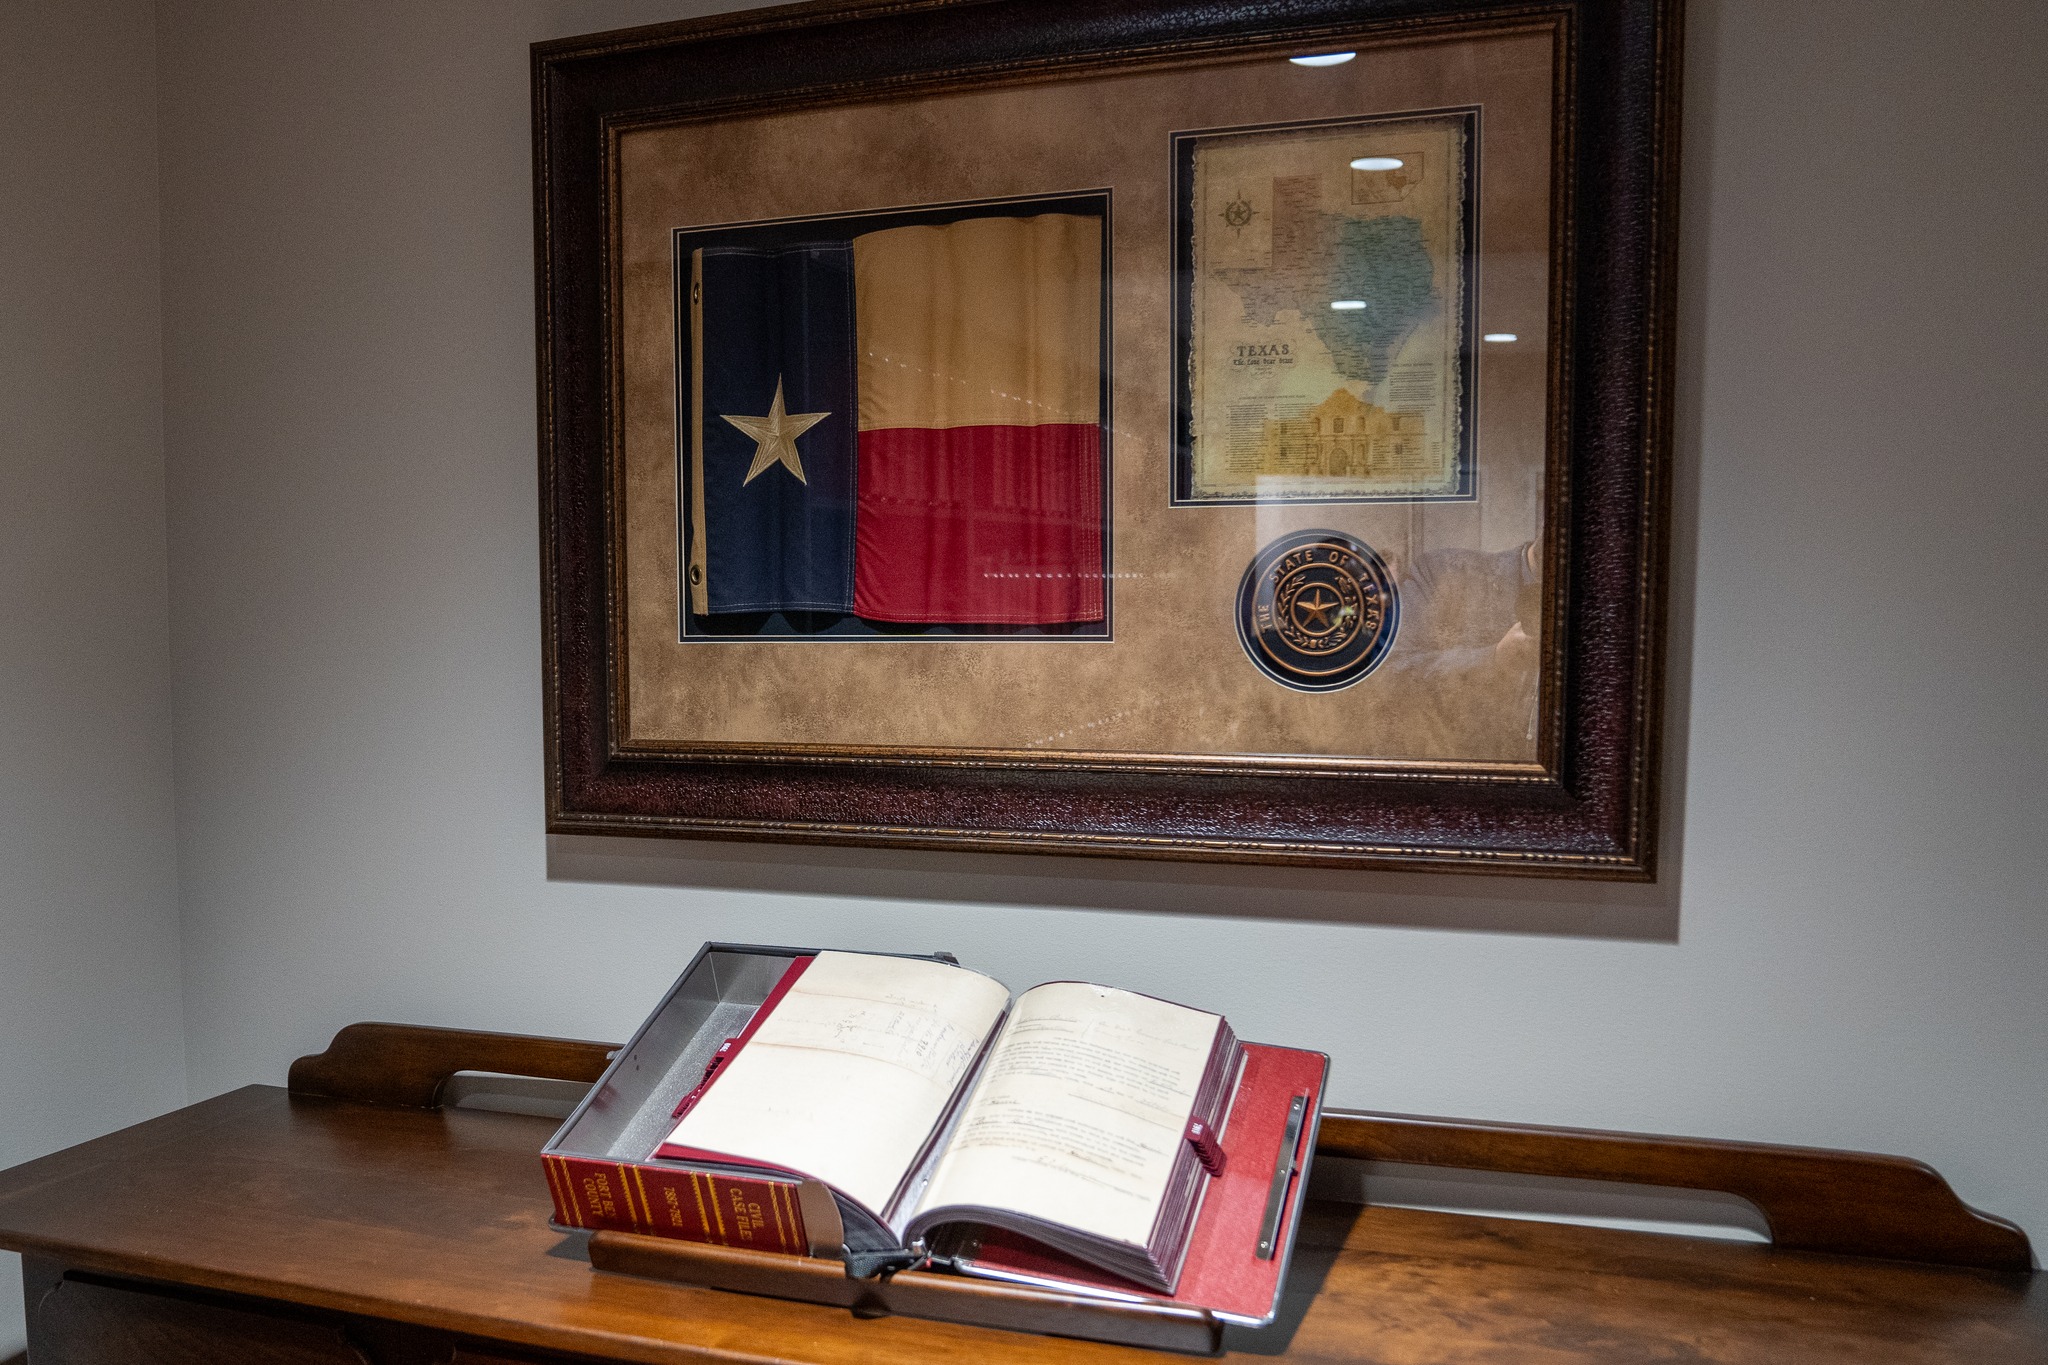 Fort Bend County District Clerk Opens Historical Documents Room to the Public with Online Access Options